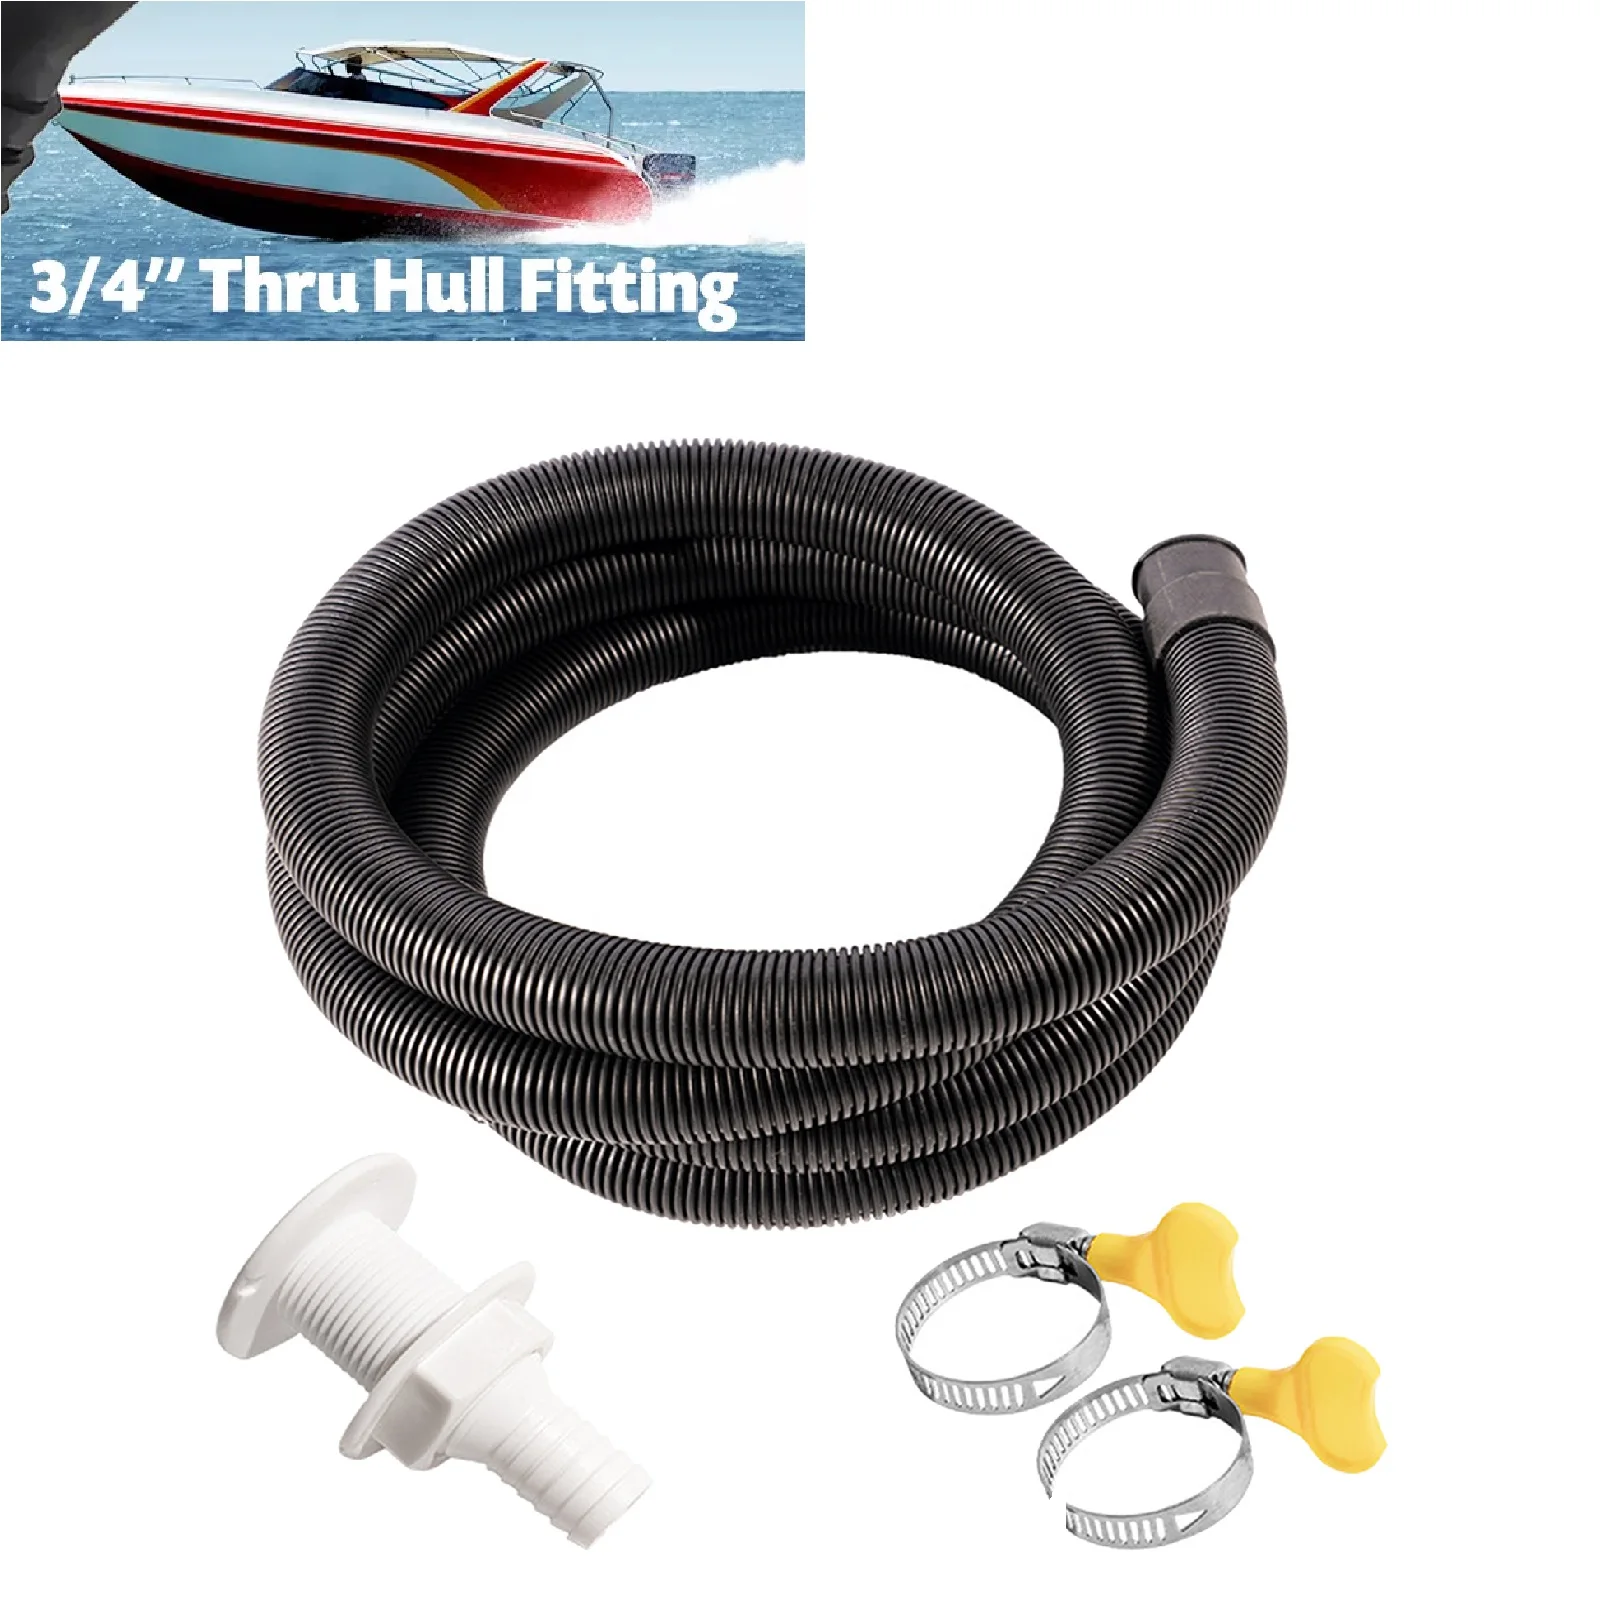 Flexible Bilge Pump Hose Installation Kit 3/4-Inch Diameter 6.6 FT for Boats with 2 Clamps and Thru-Hull Fitting flexible clip clamp mount with base for babysense hd s2 babysense v43 baby monitor clip to crib cot shelves or furniture